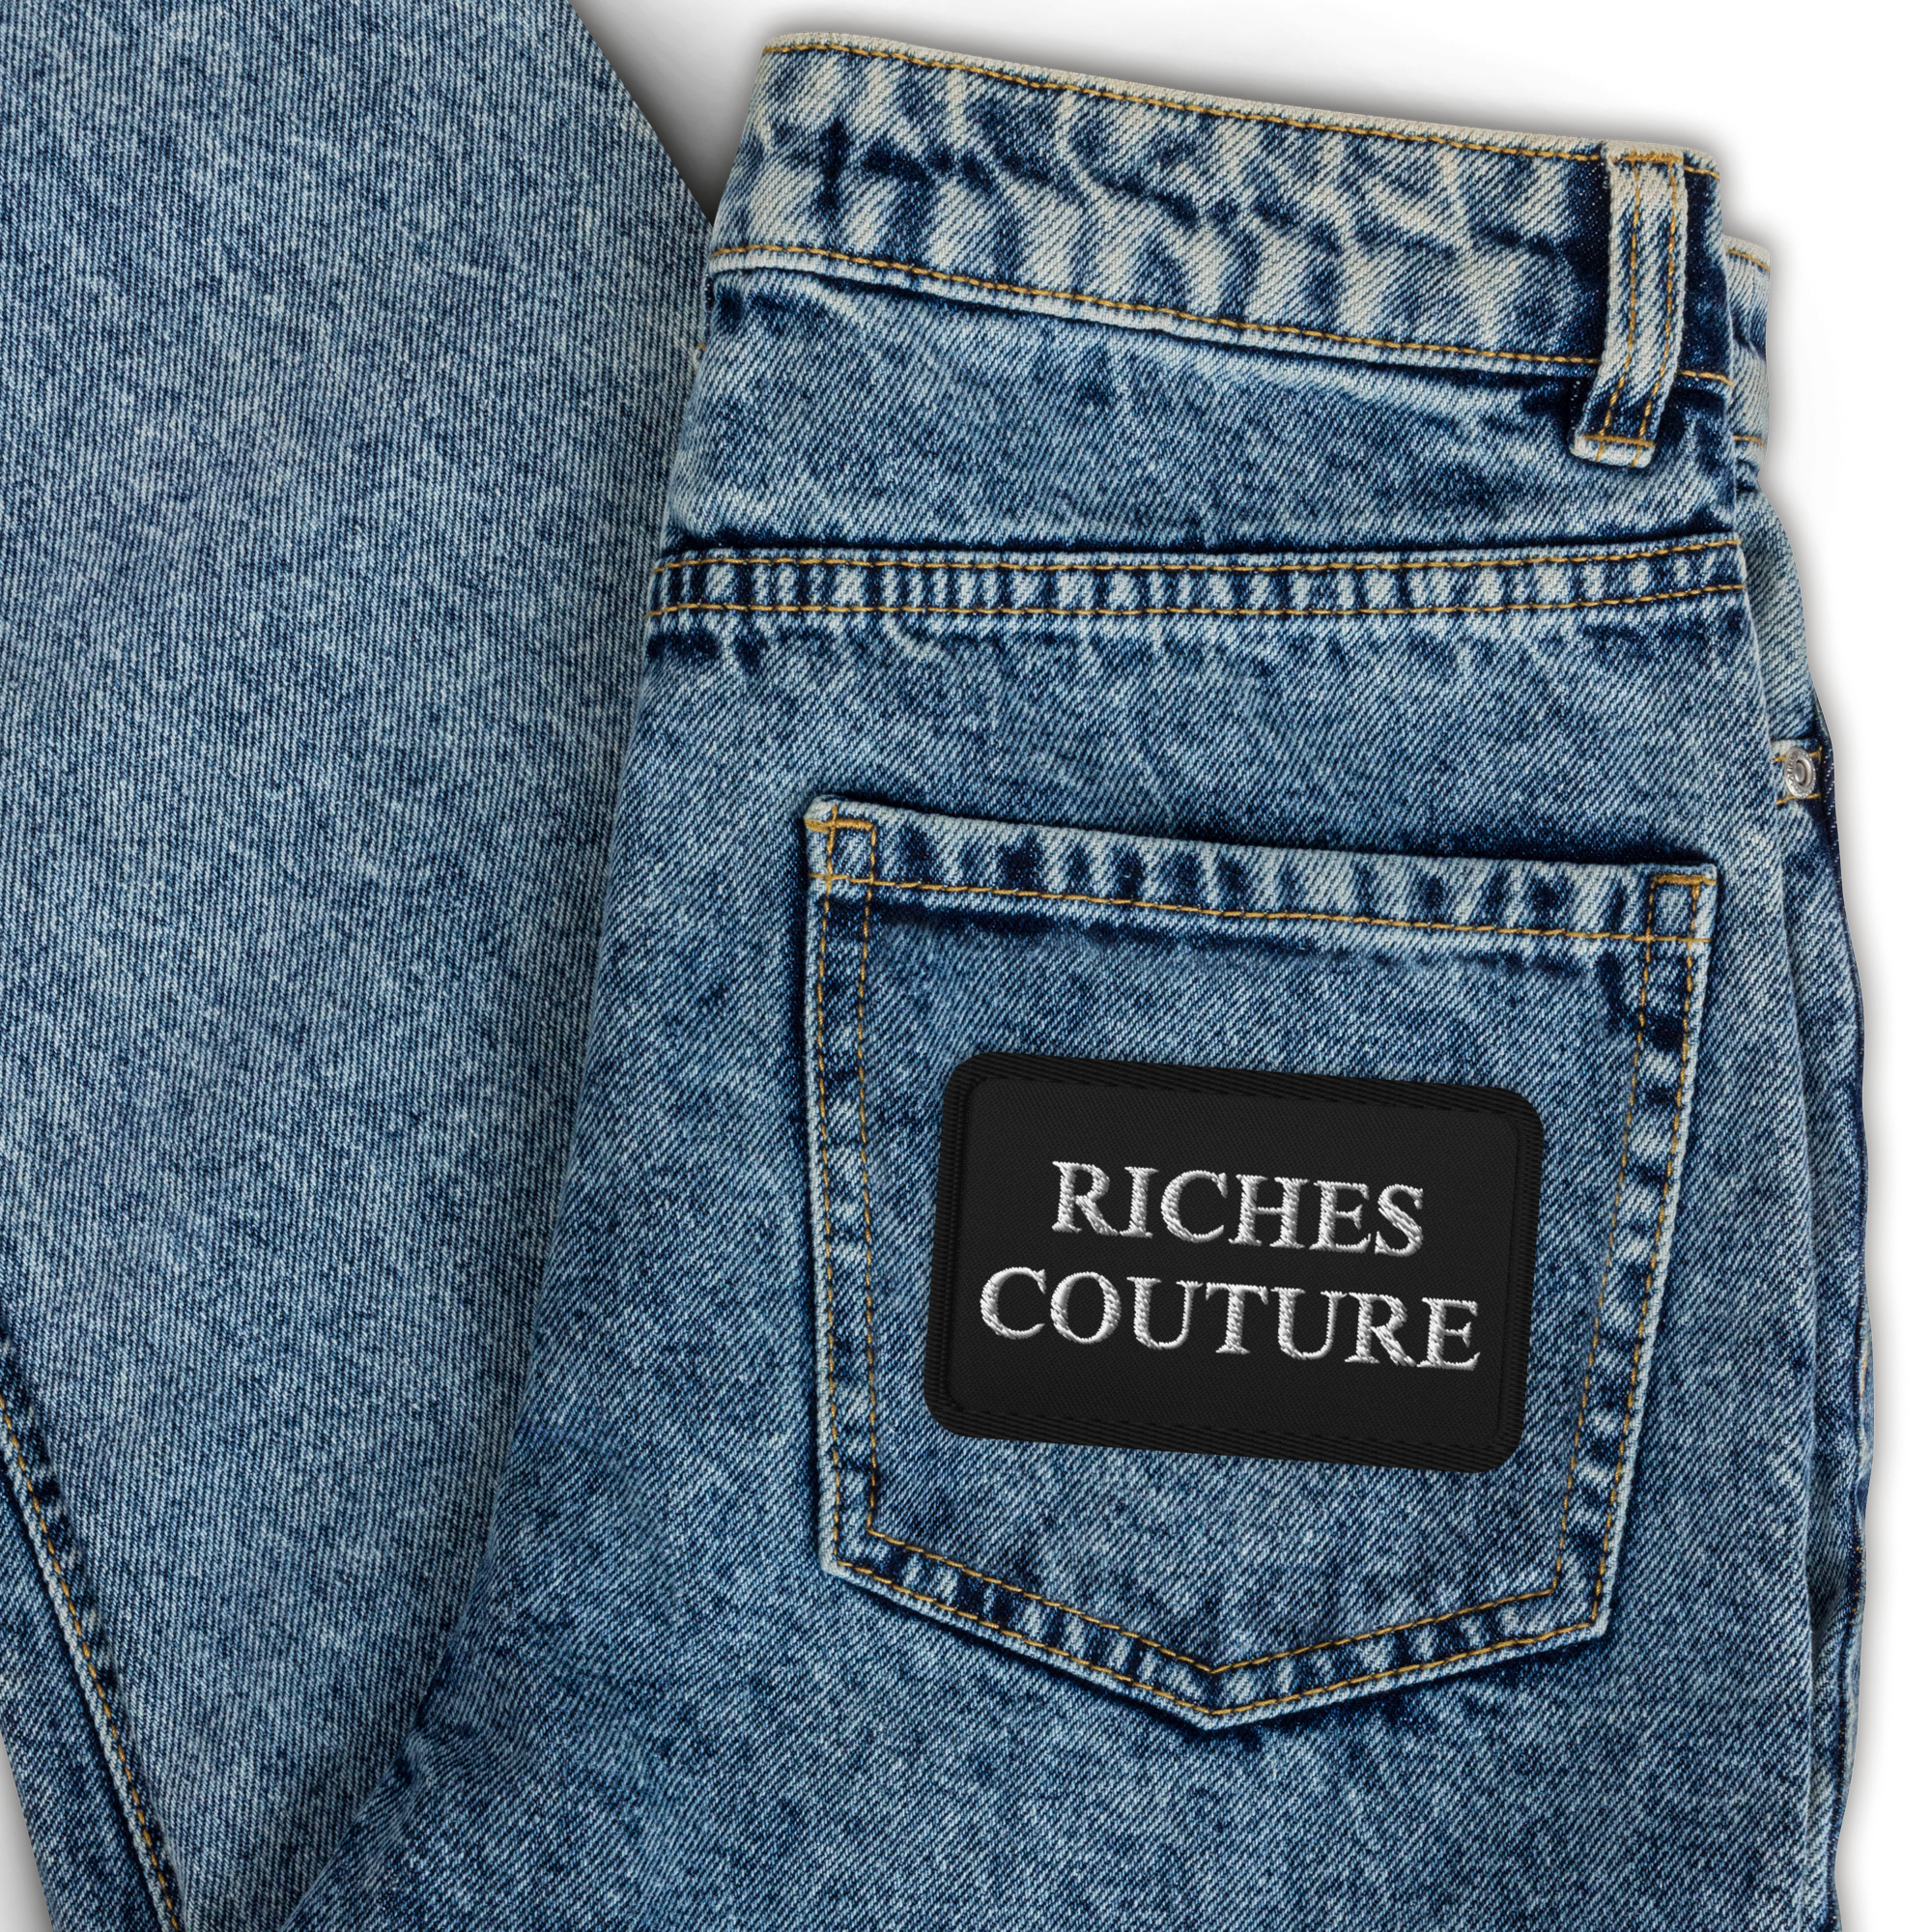 Riches Couture black embroidered patch